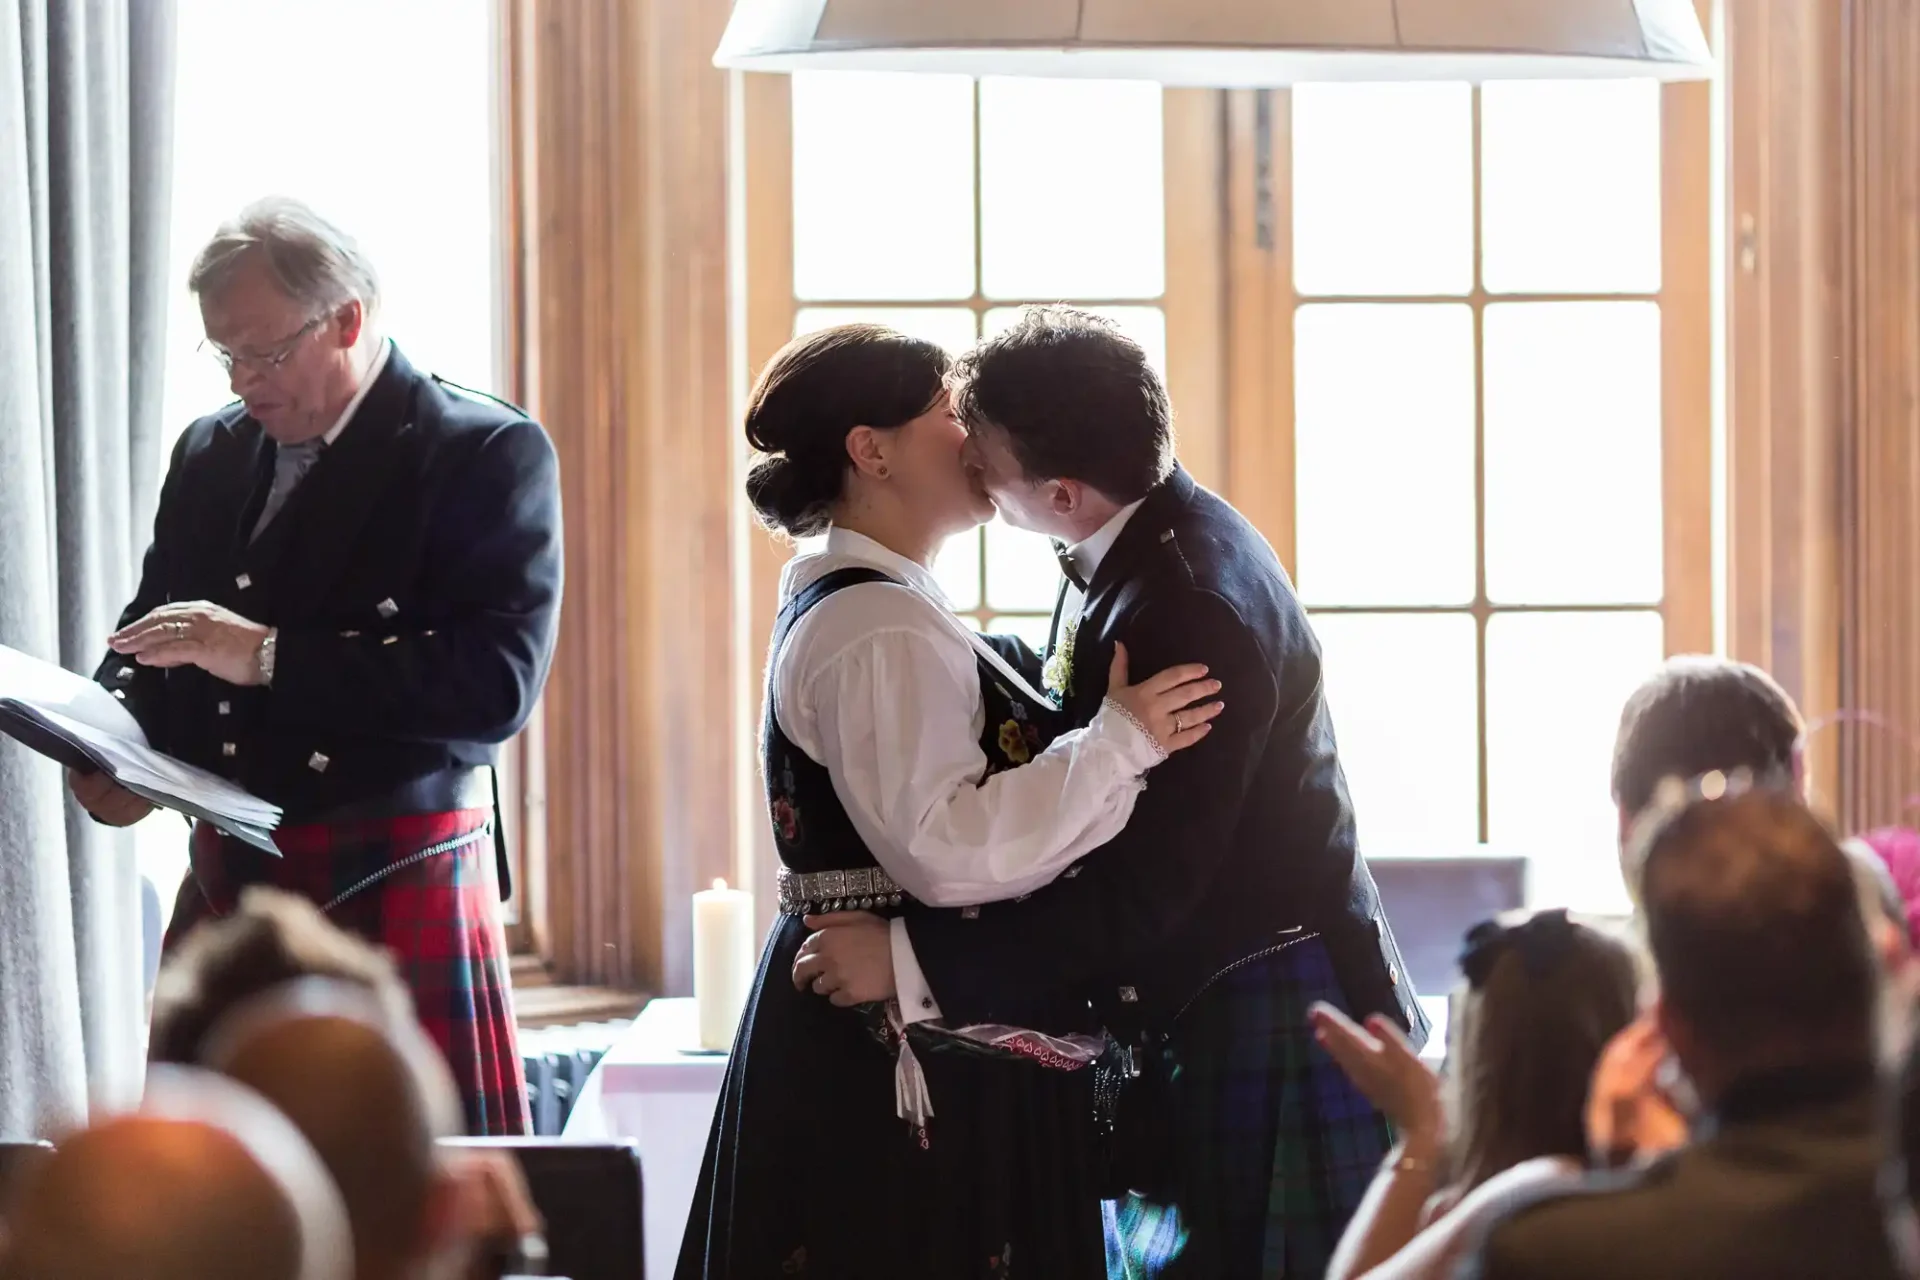 A couple in traditional scottish attire kissing at their wedding, with an officiant and guests in the background.